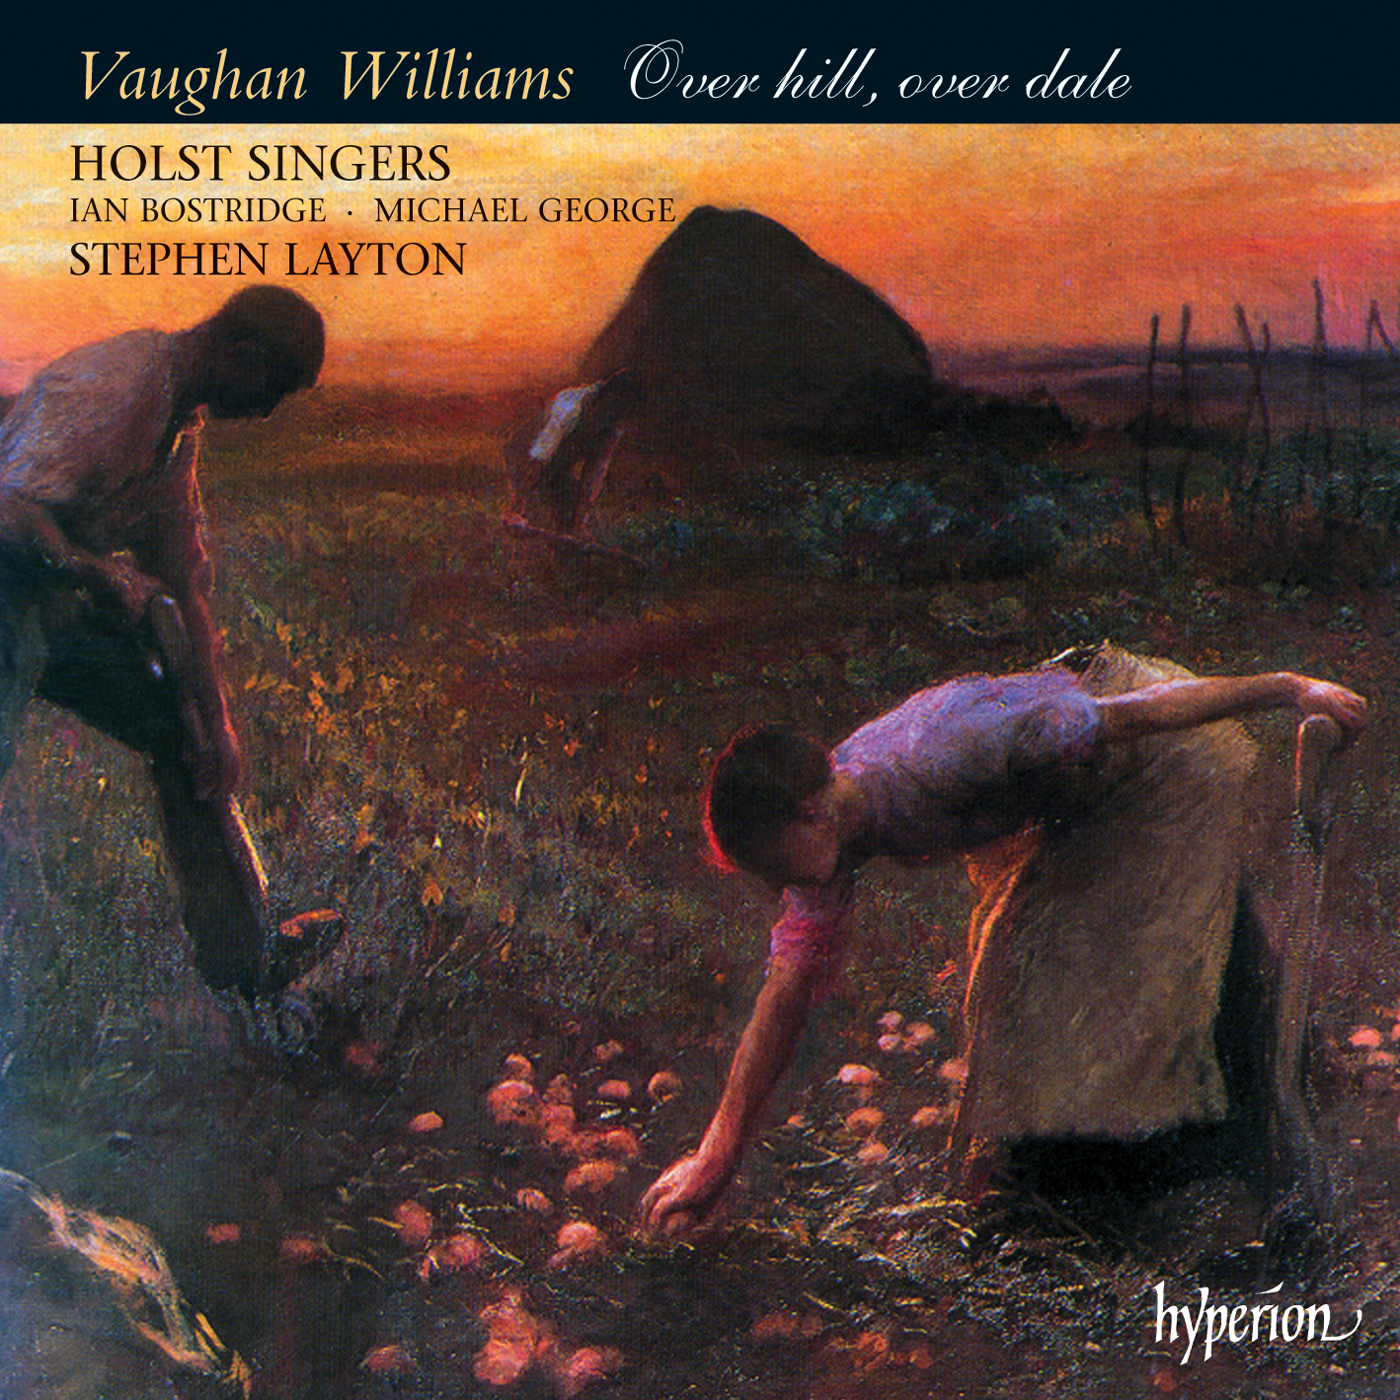 Vaughan Williams: Over hill, over dale – Partsongs, folksongs & Shakespeare settings